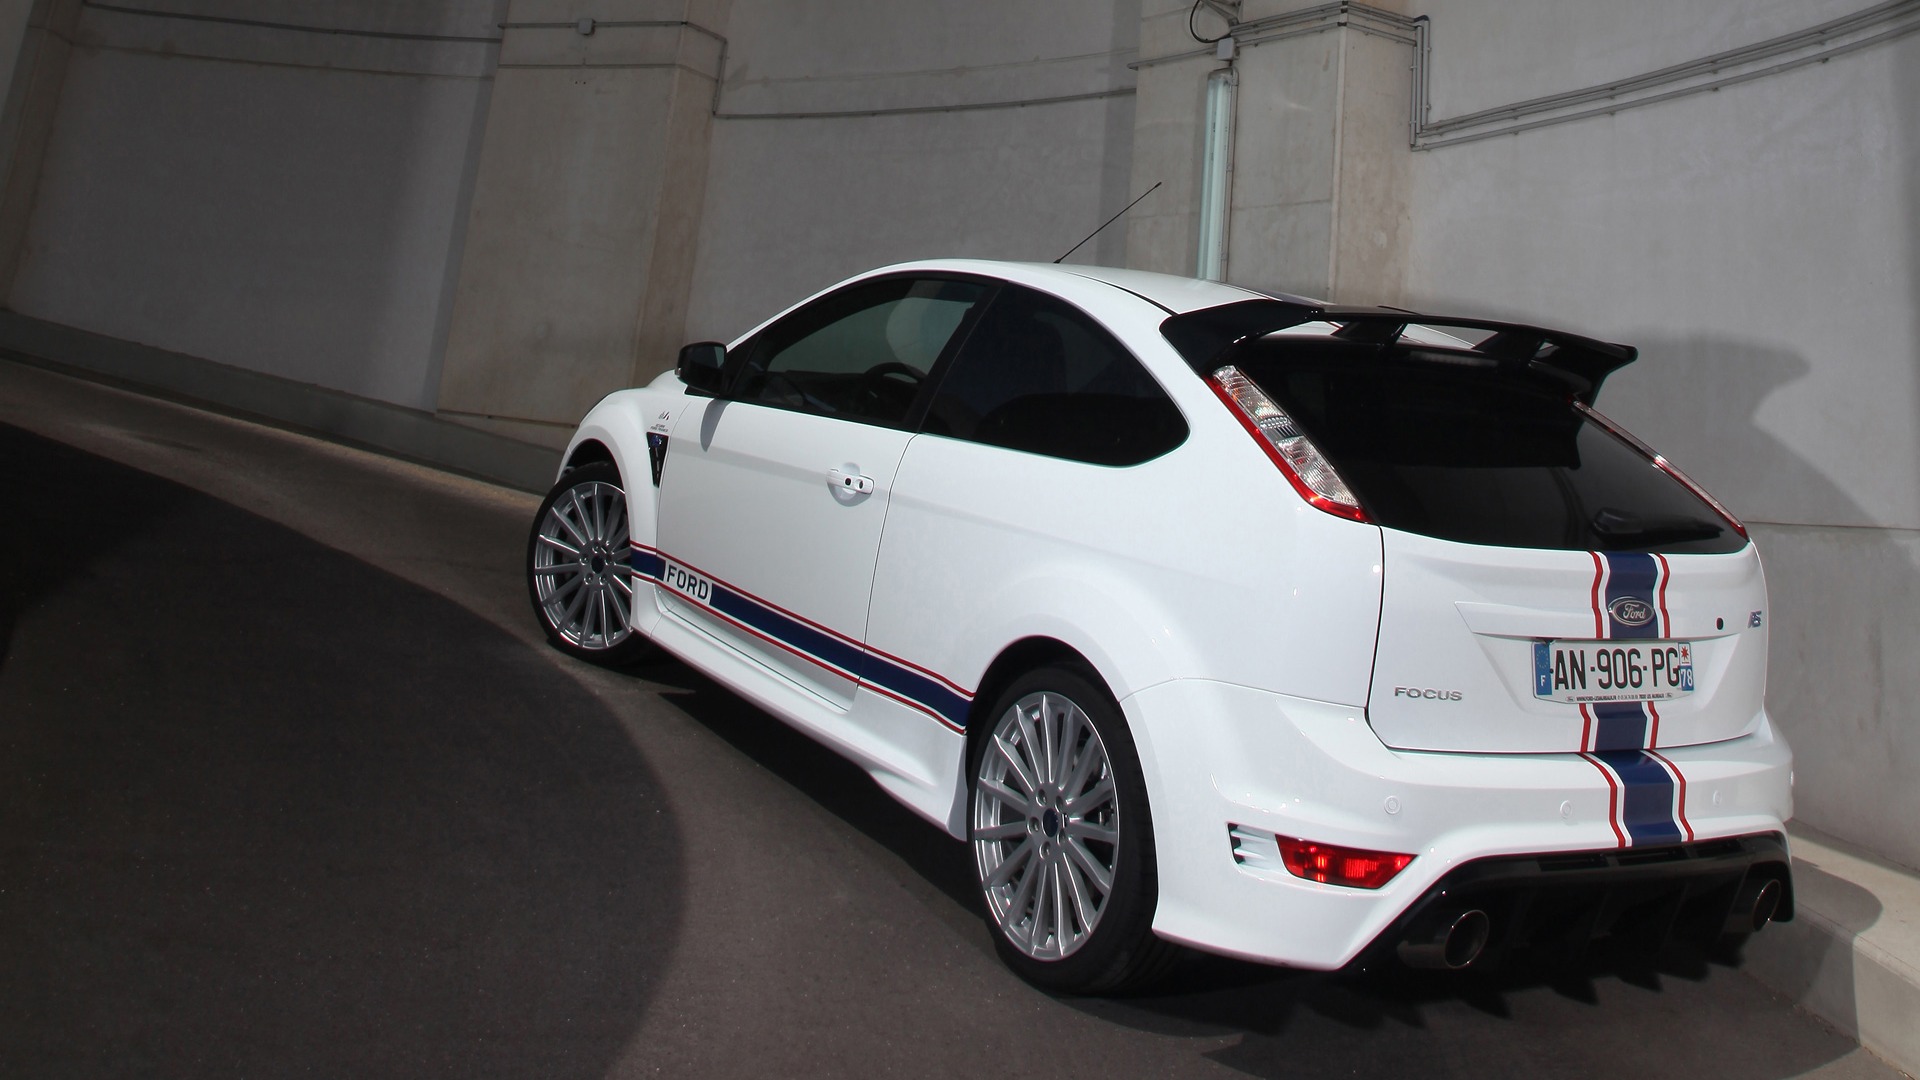 Ford Focus RS Le Mans Classic - 2010 福特8 - 1920x1080